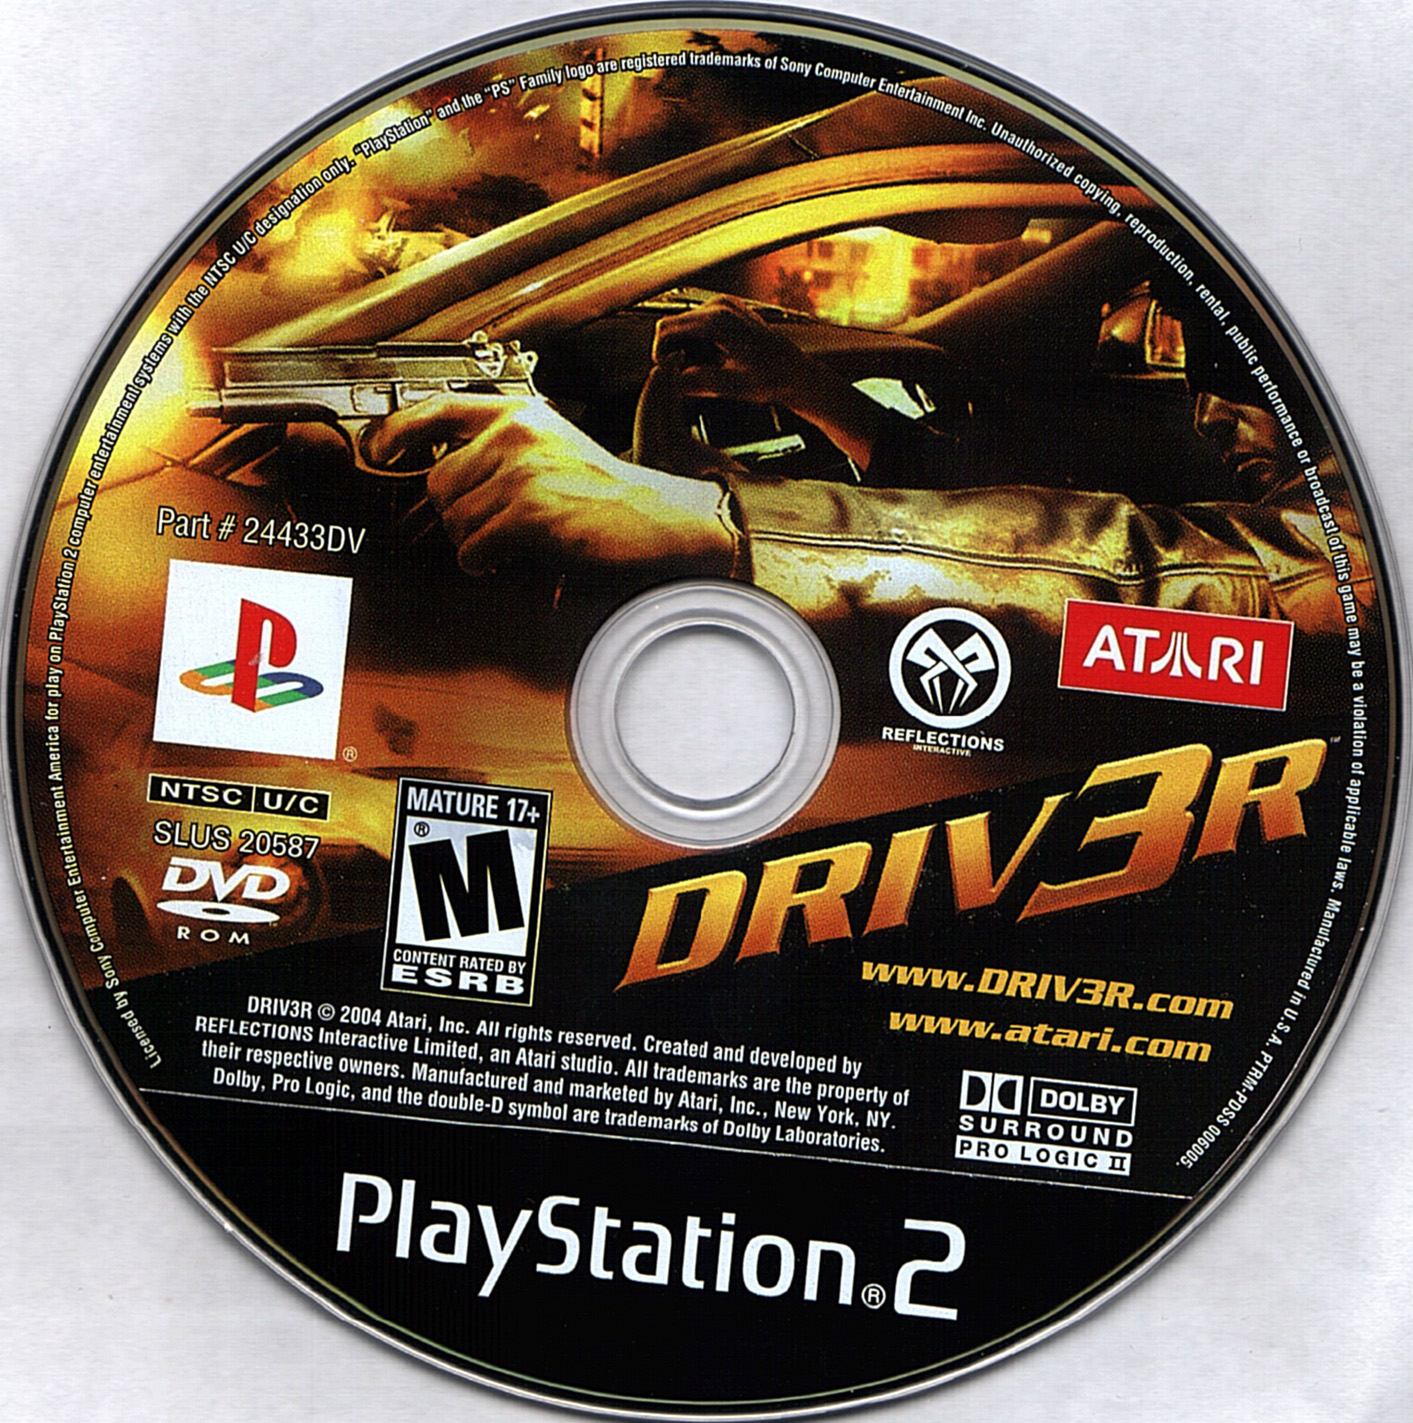 Драйвер пс3. Driver 3 ps2 Cover. Driver ps2 диск. Driver 1 для ps1 диск. Driver 3 ps2 ISO.